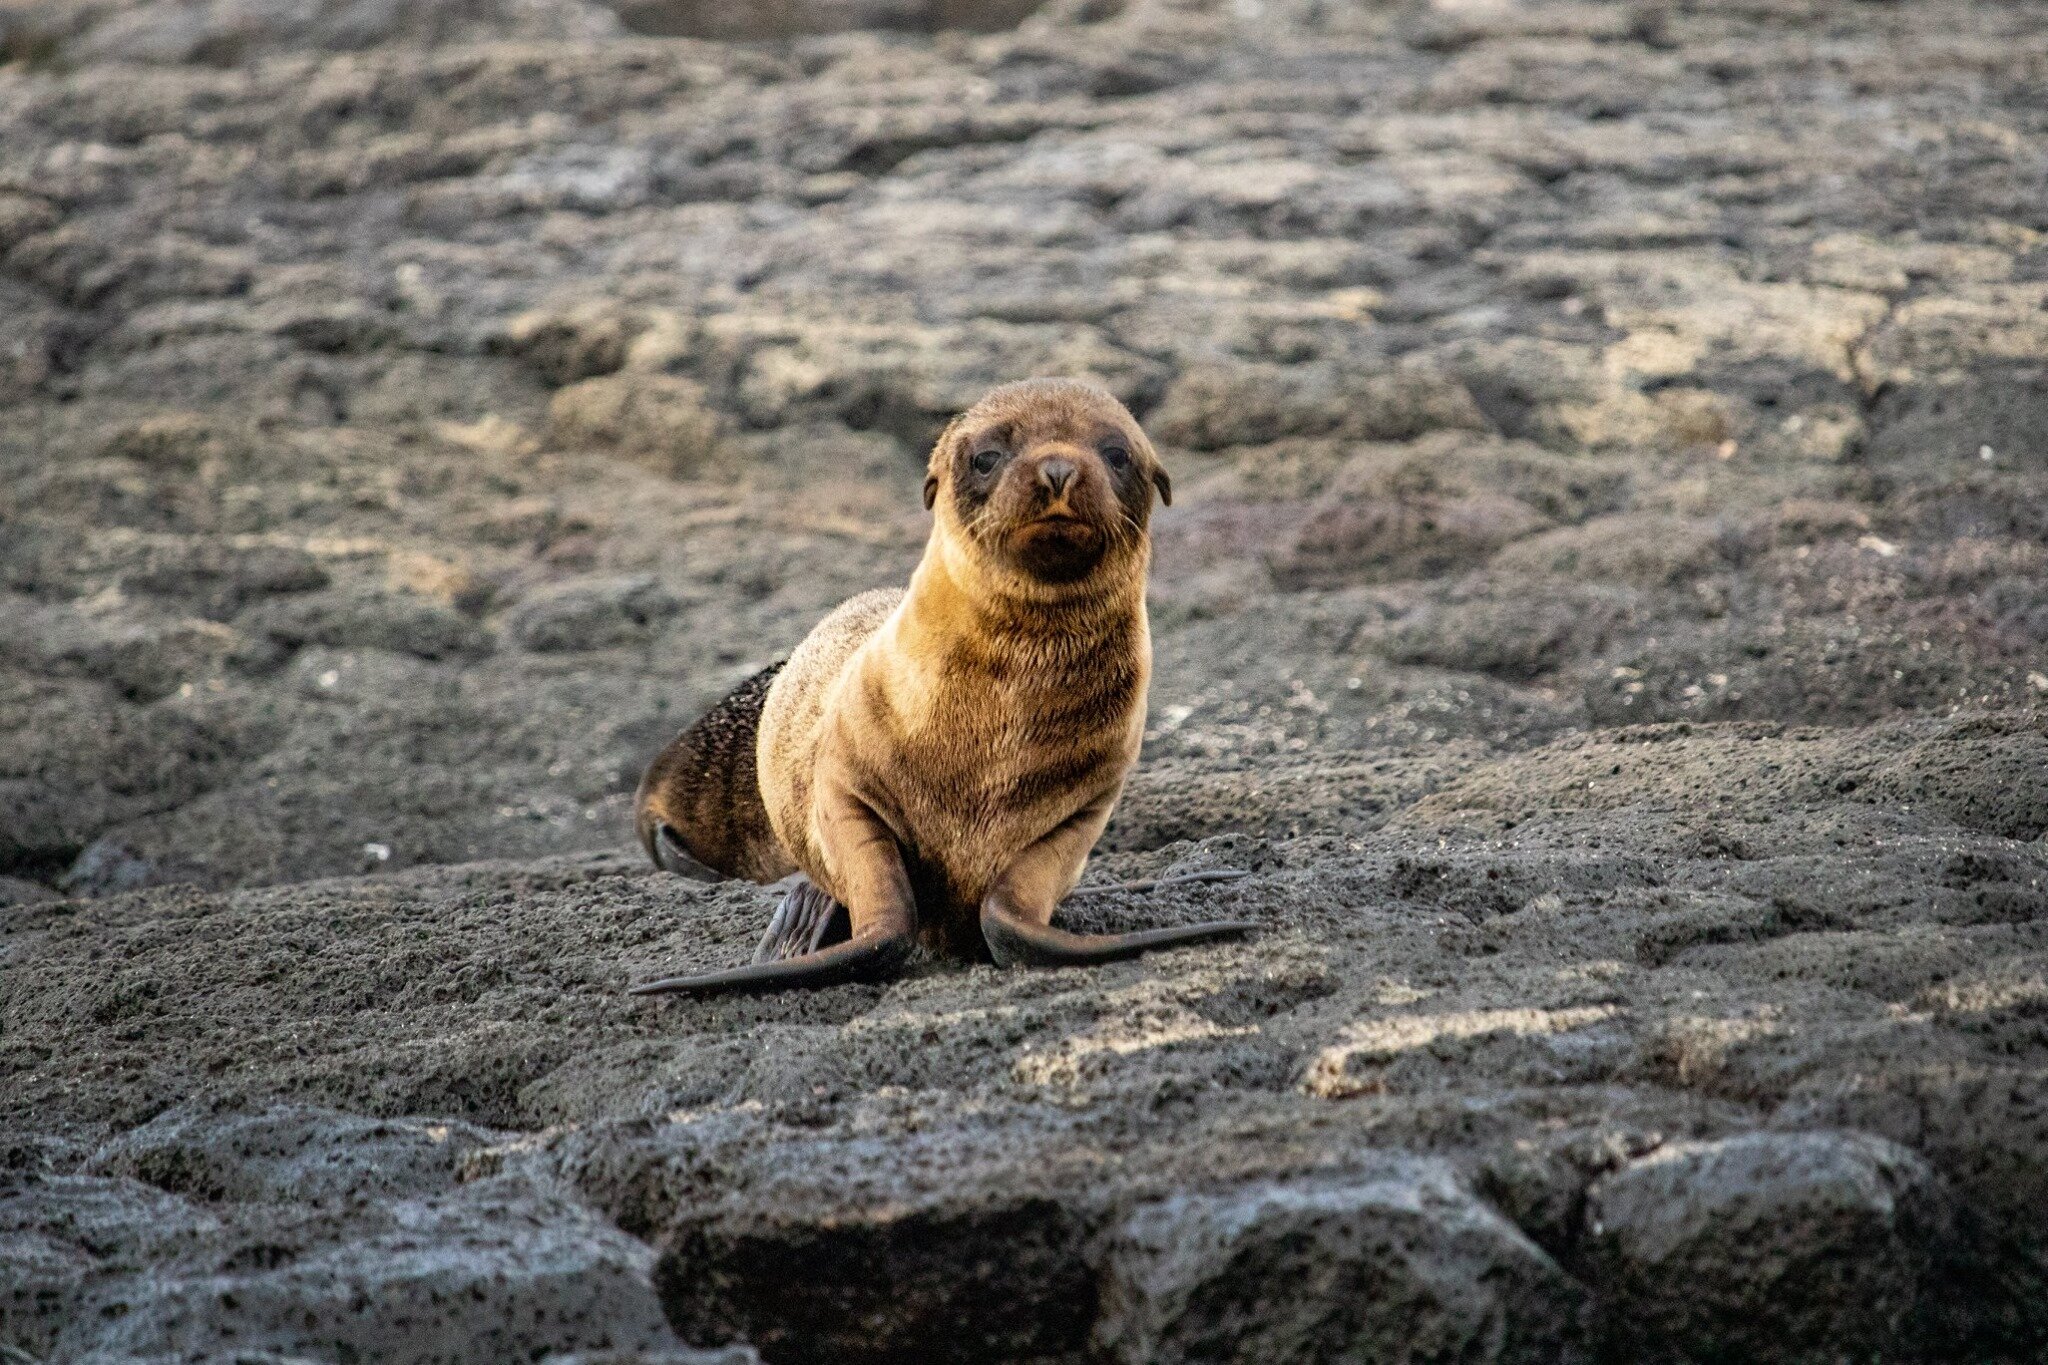 Galapagos Sea Lion © 2020 Katie Murray | All Rights Reserved